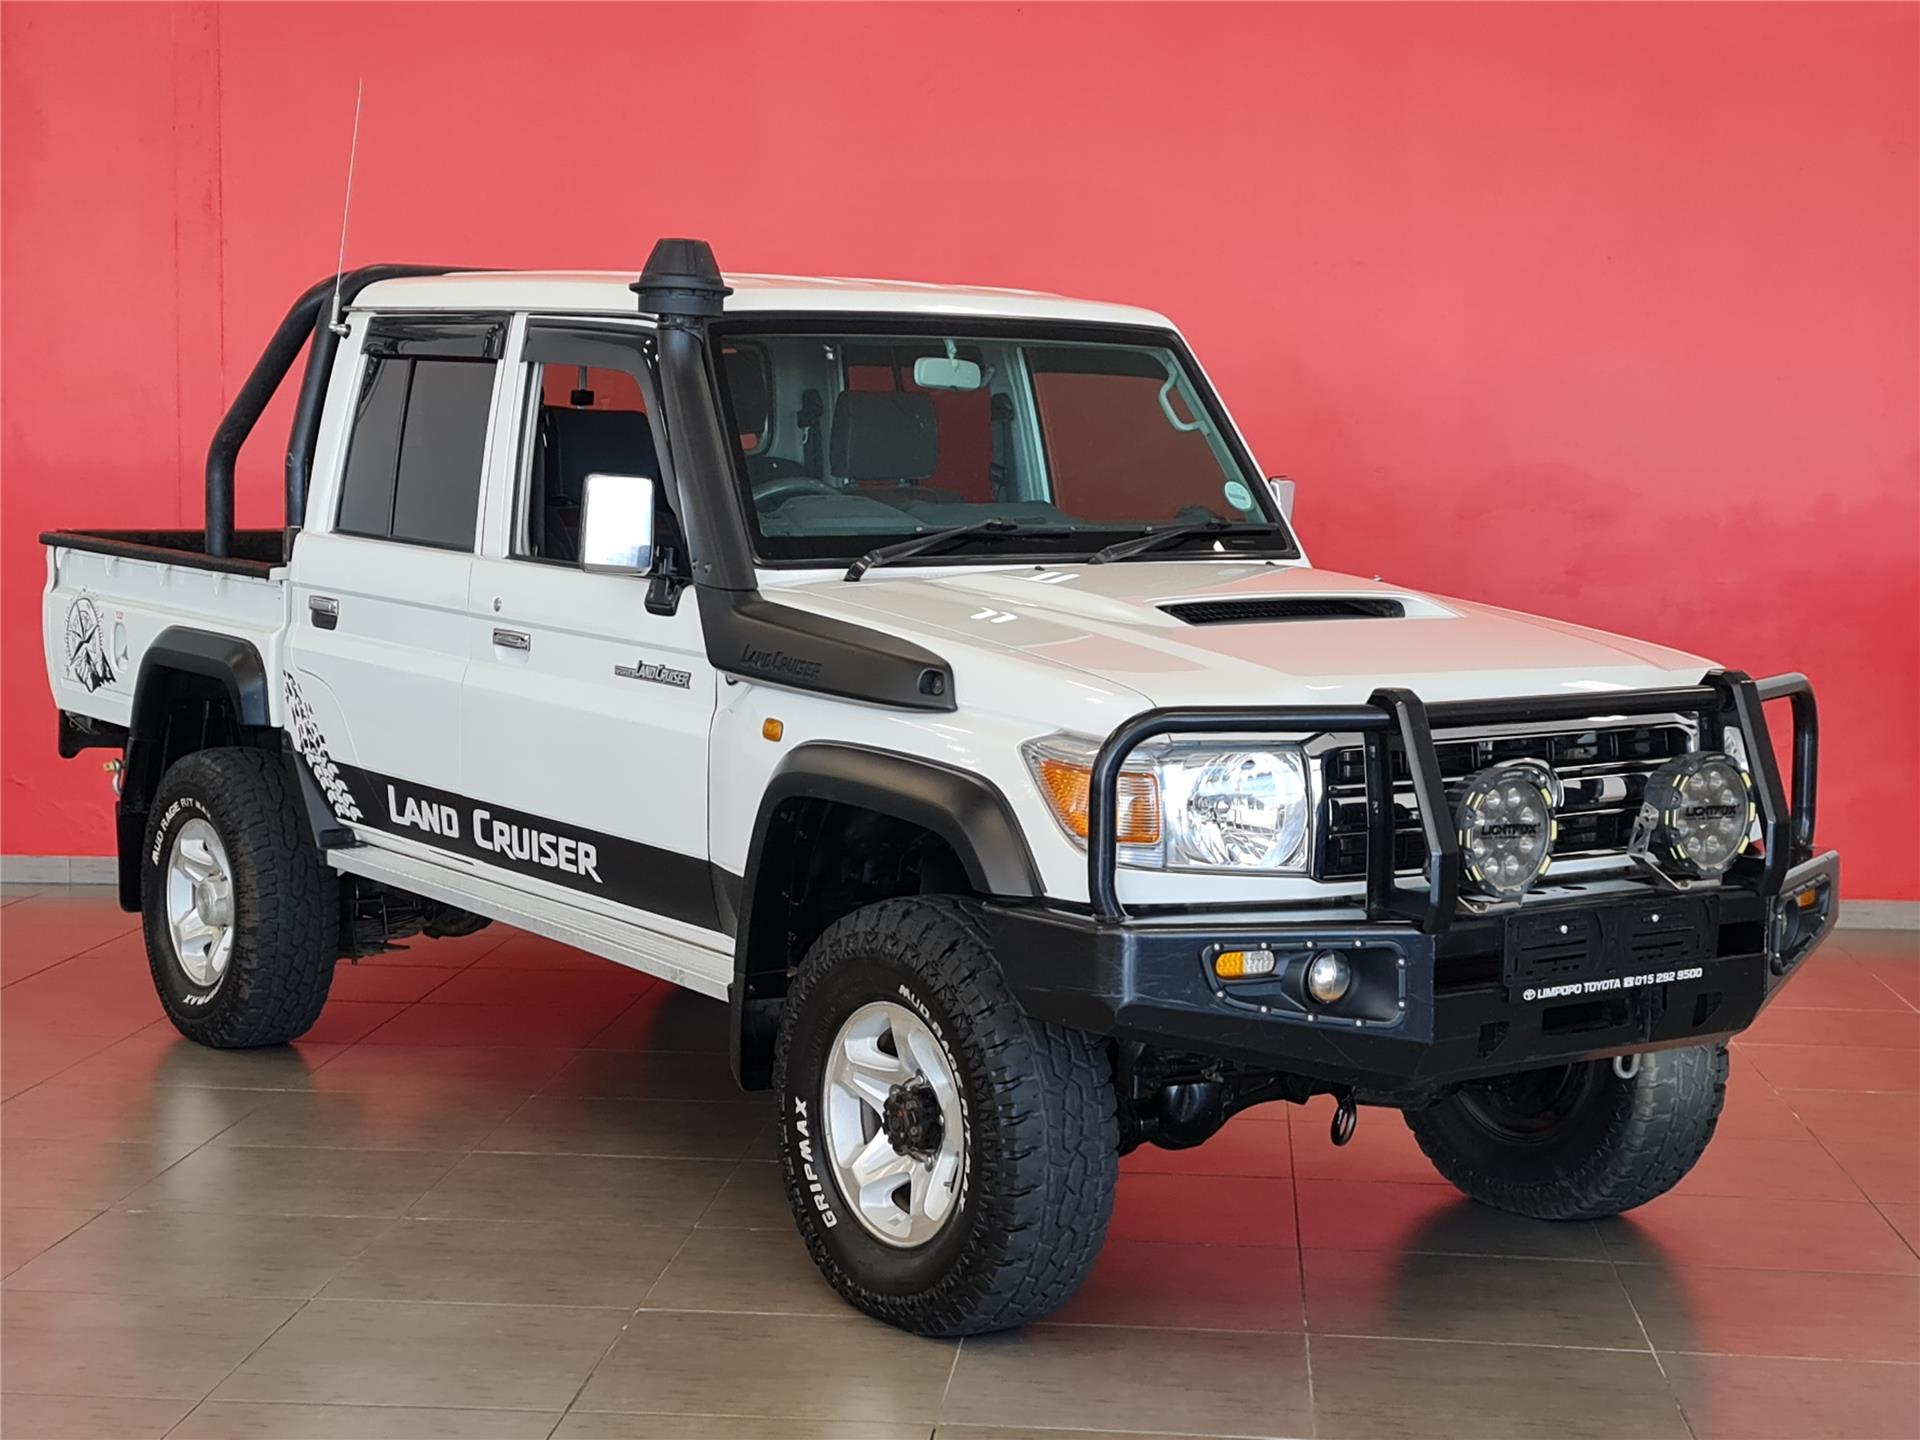 2016 Toyota Land Cruiser 79  for sale in Limpopo, Polokwane - 1082299/1